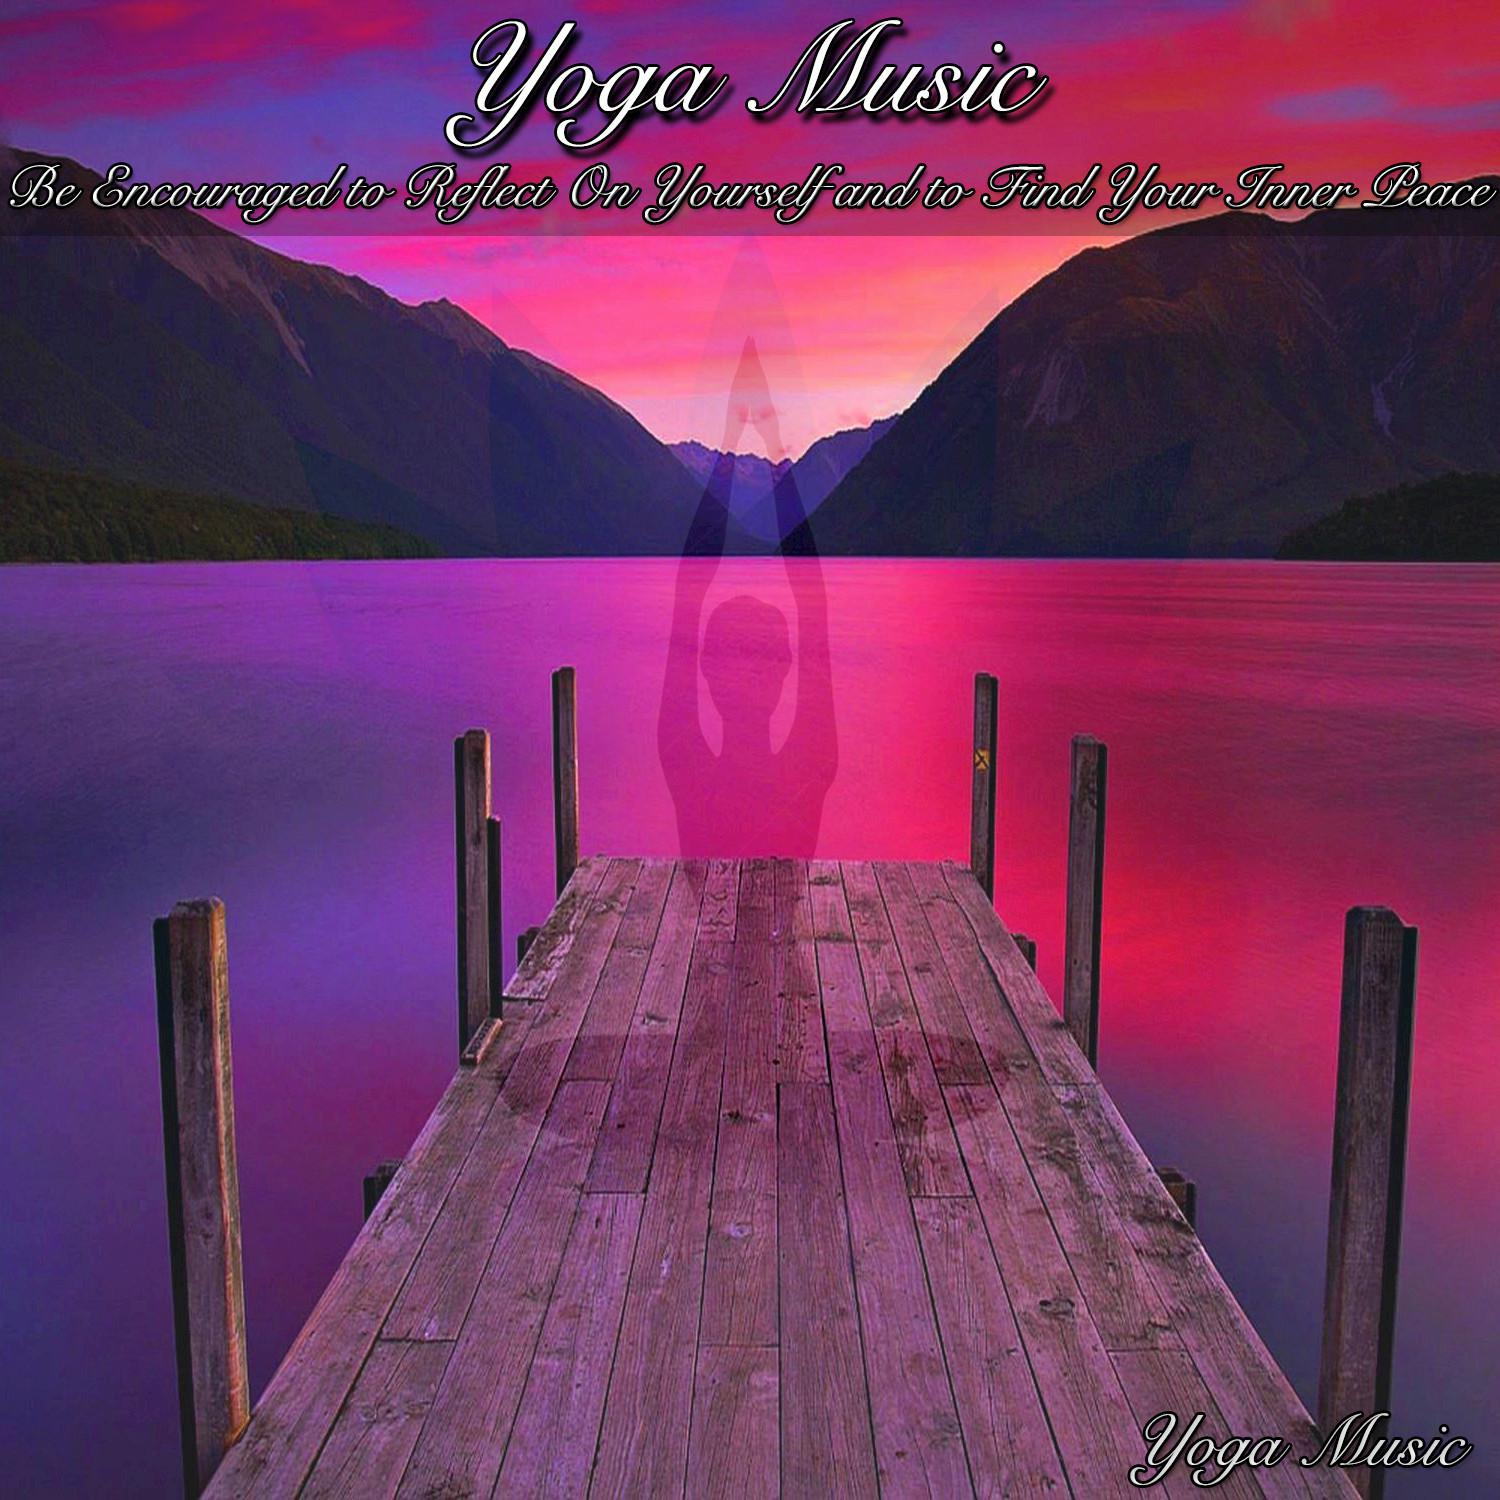 Yoga Music Be Encouraged to Reflect On Yourself and to Find Your Inner Peace